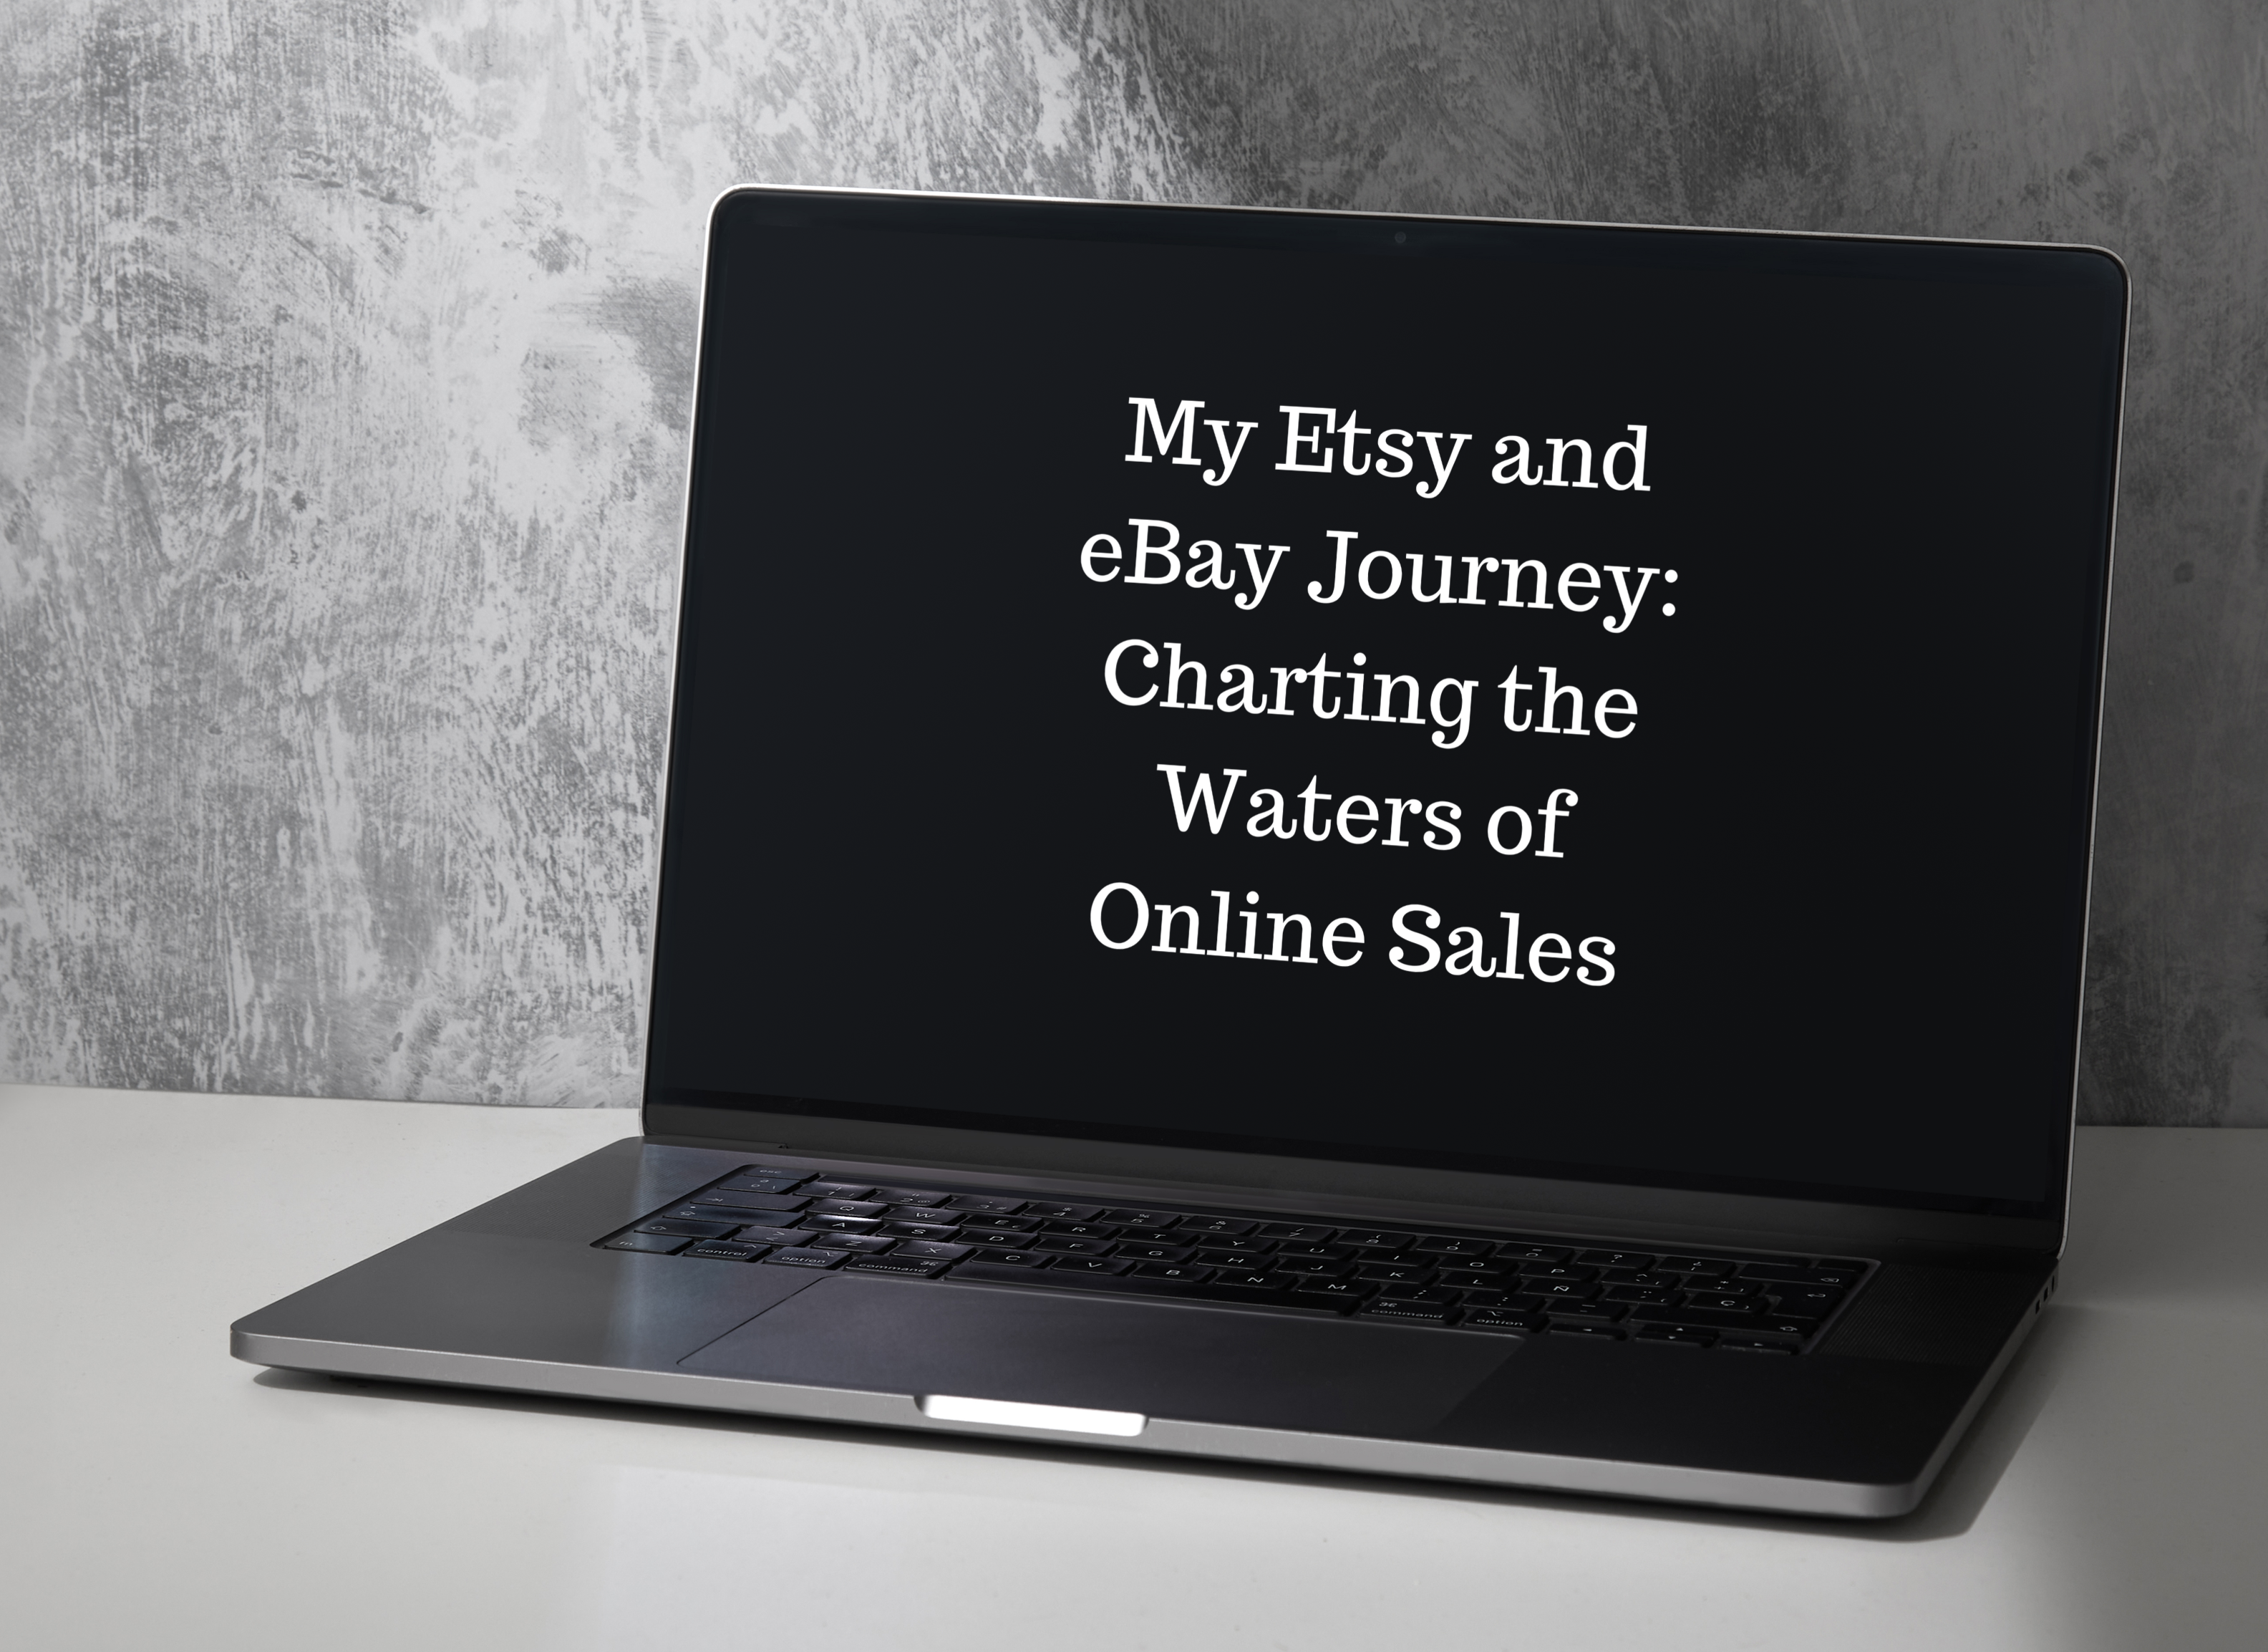 My Etsy and eBay Journey: Charting the Waters of Online Sales